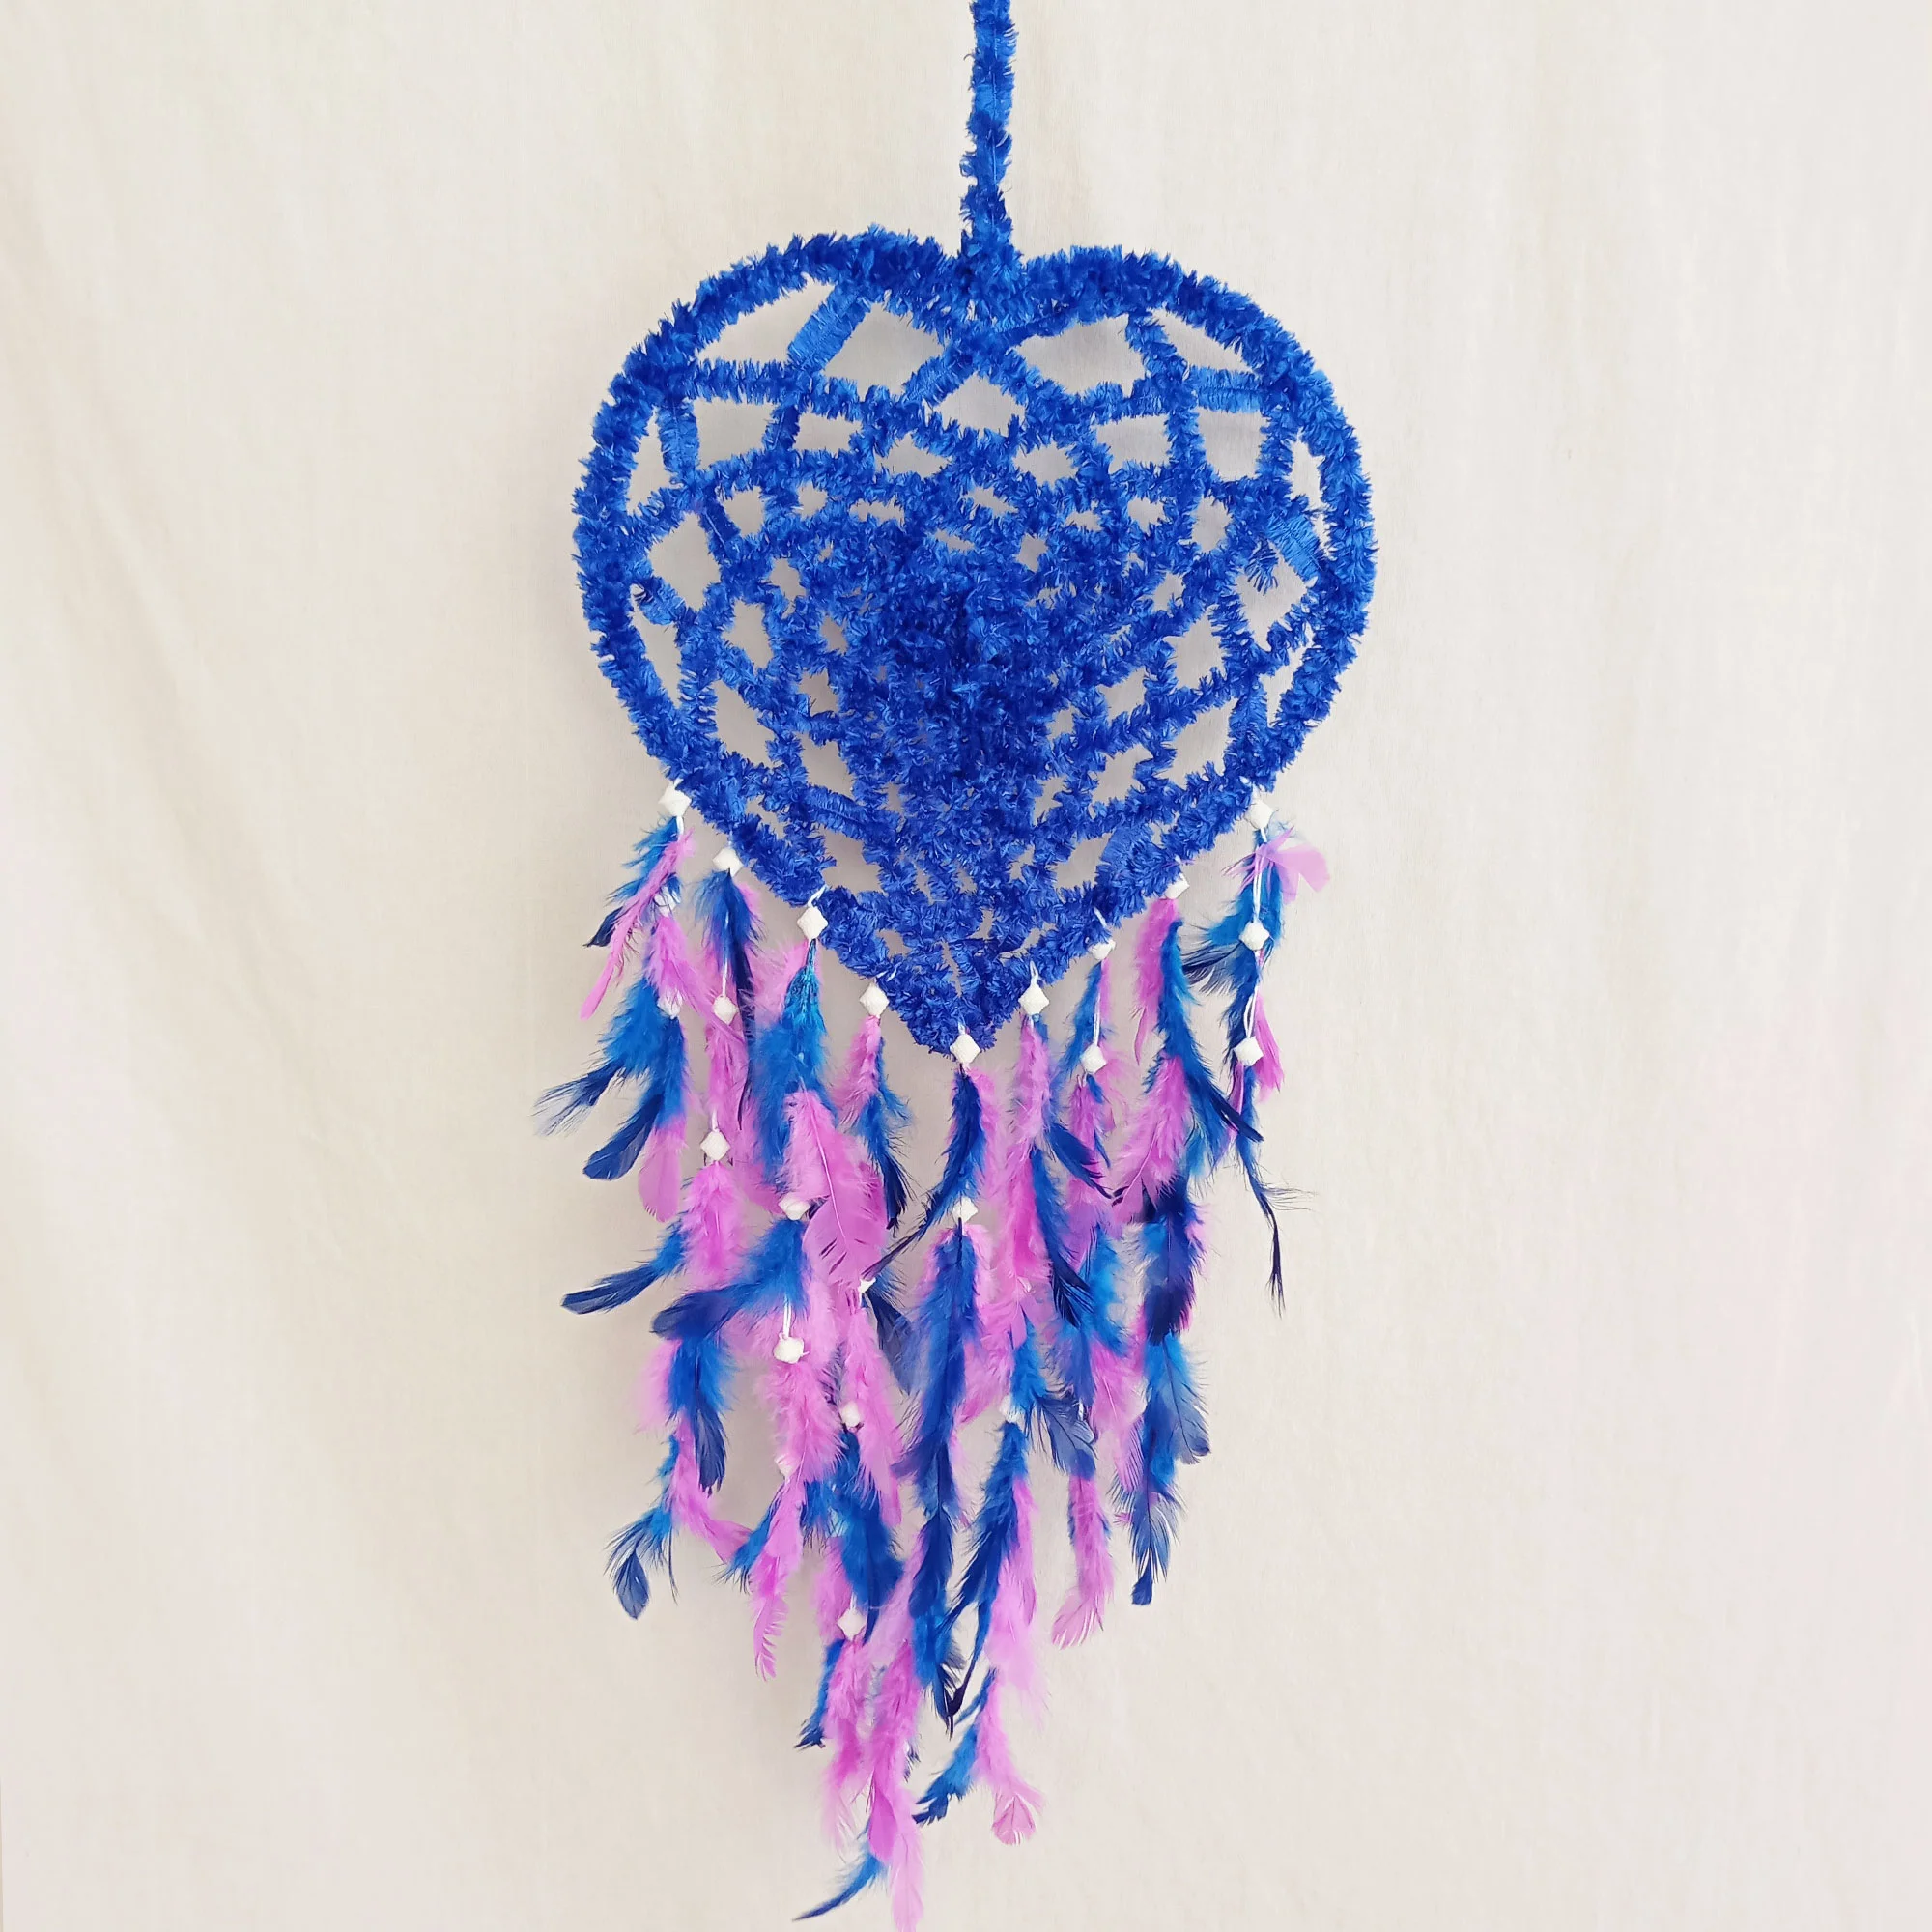 Blue Purple Dream Catcher For Wall Hangings, Home Décor, Handmade for Bedroom, Balcony Decorative with Feathers